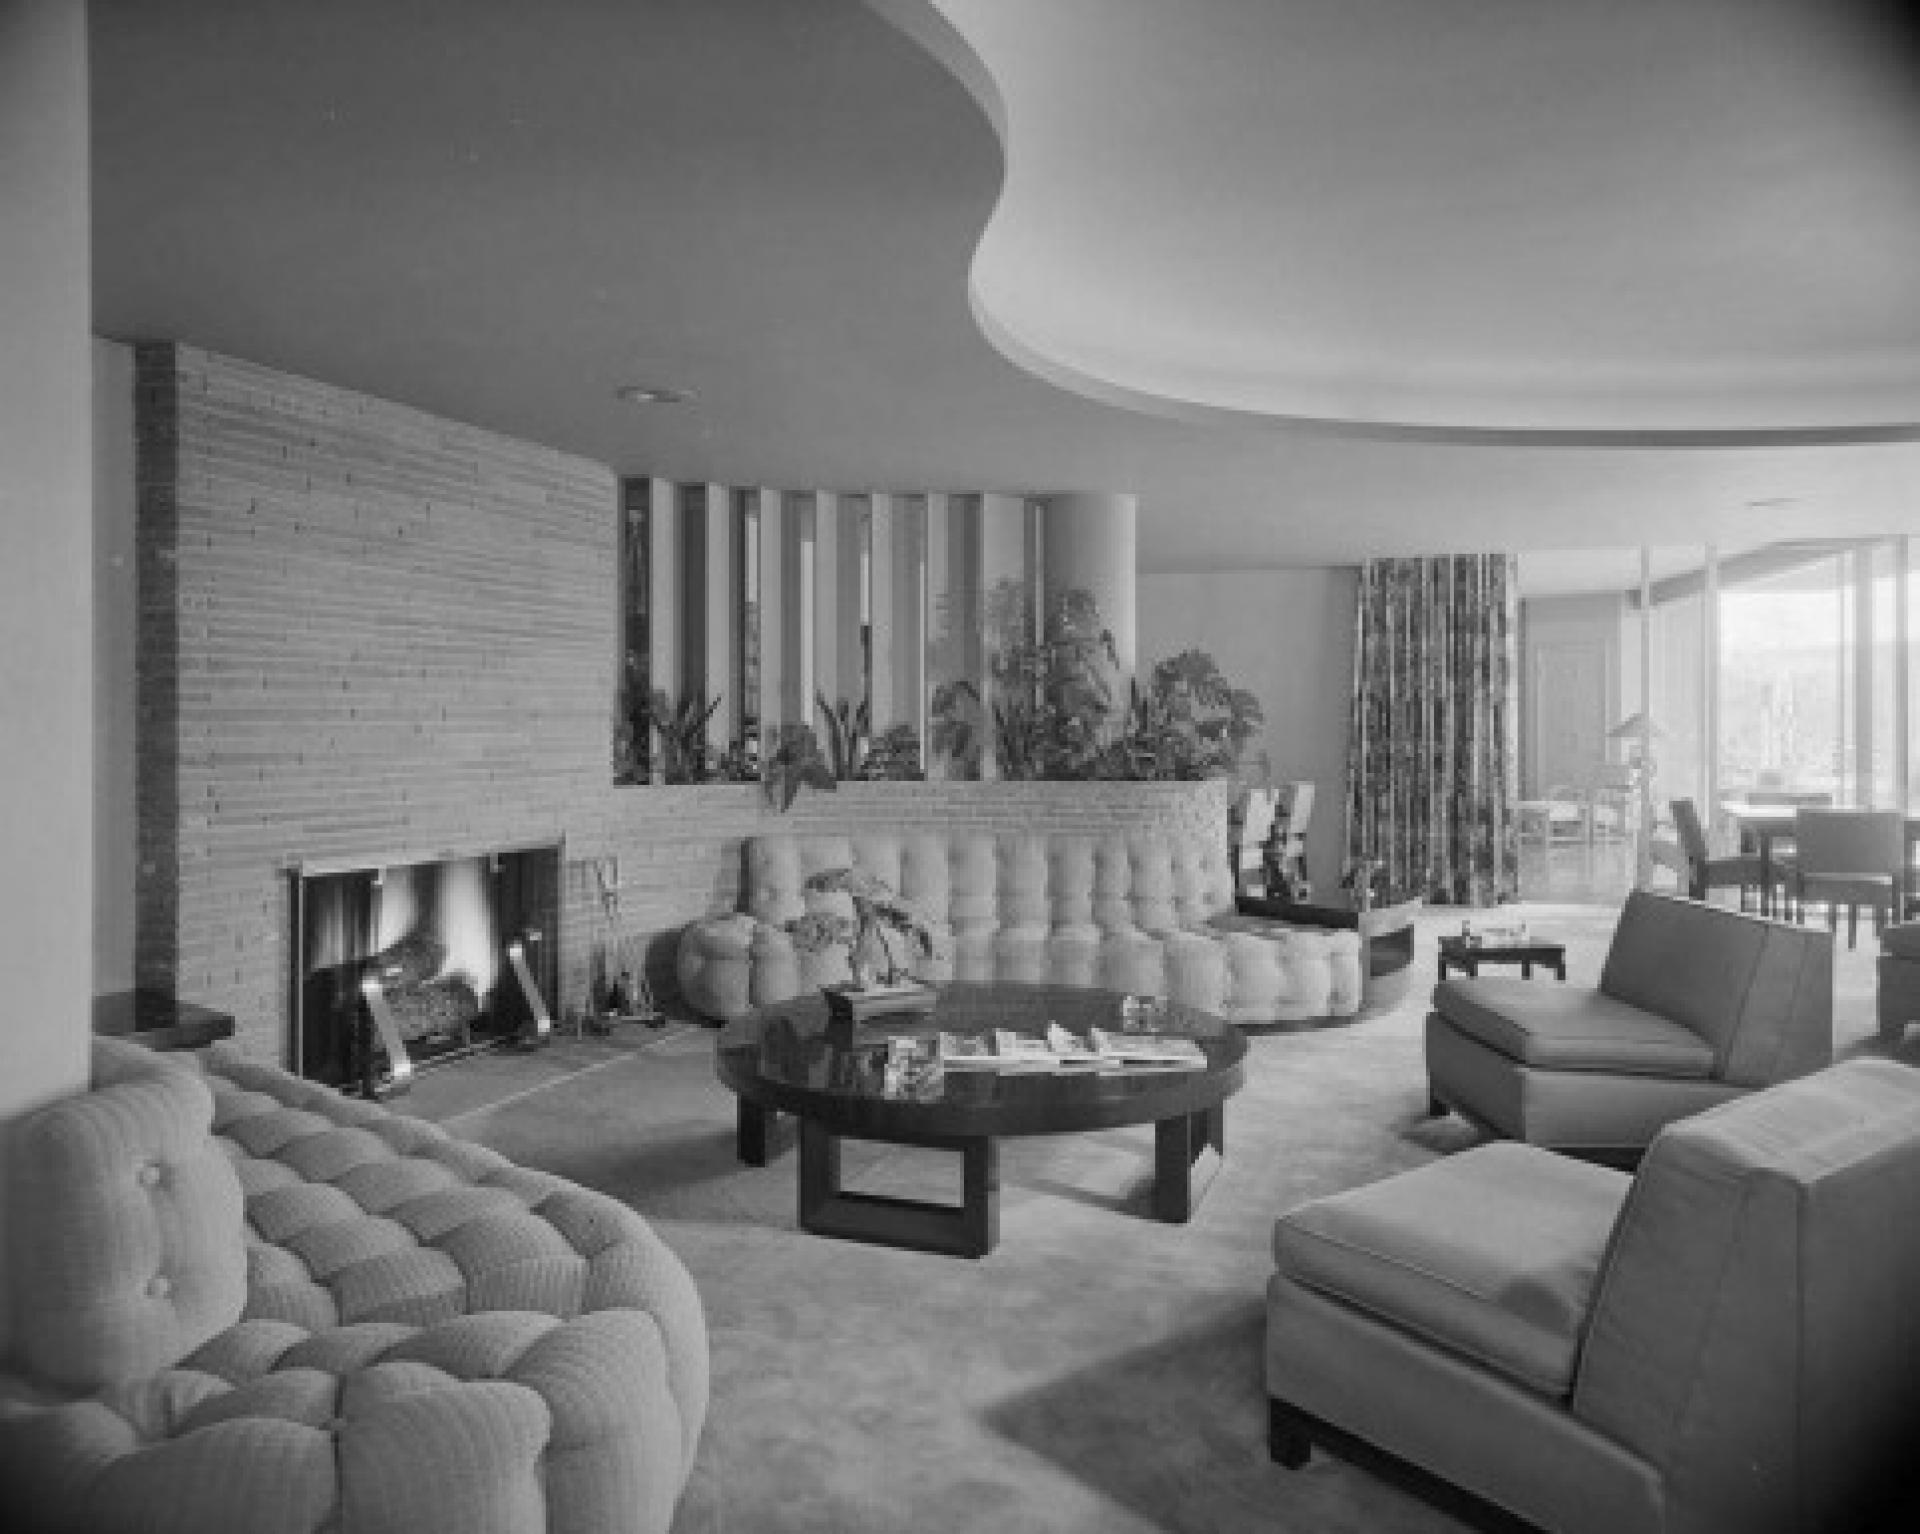 The living room of the Lillen Residence combines organic curvature with the modern lines. | Photo via The Paul Revere Williams Project